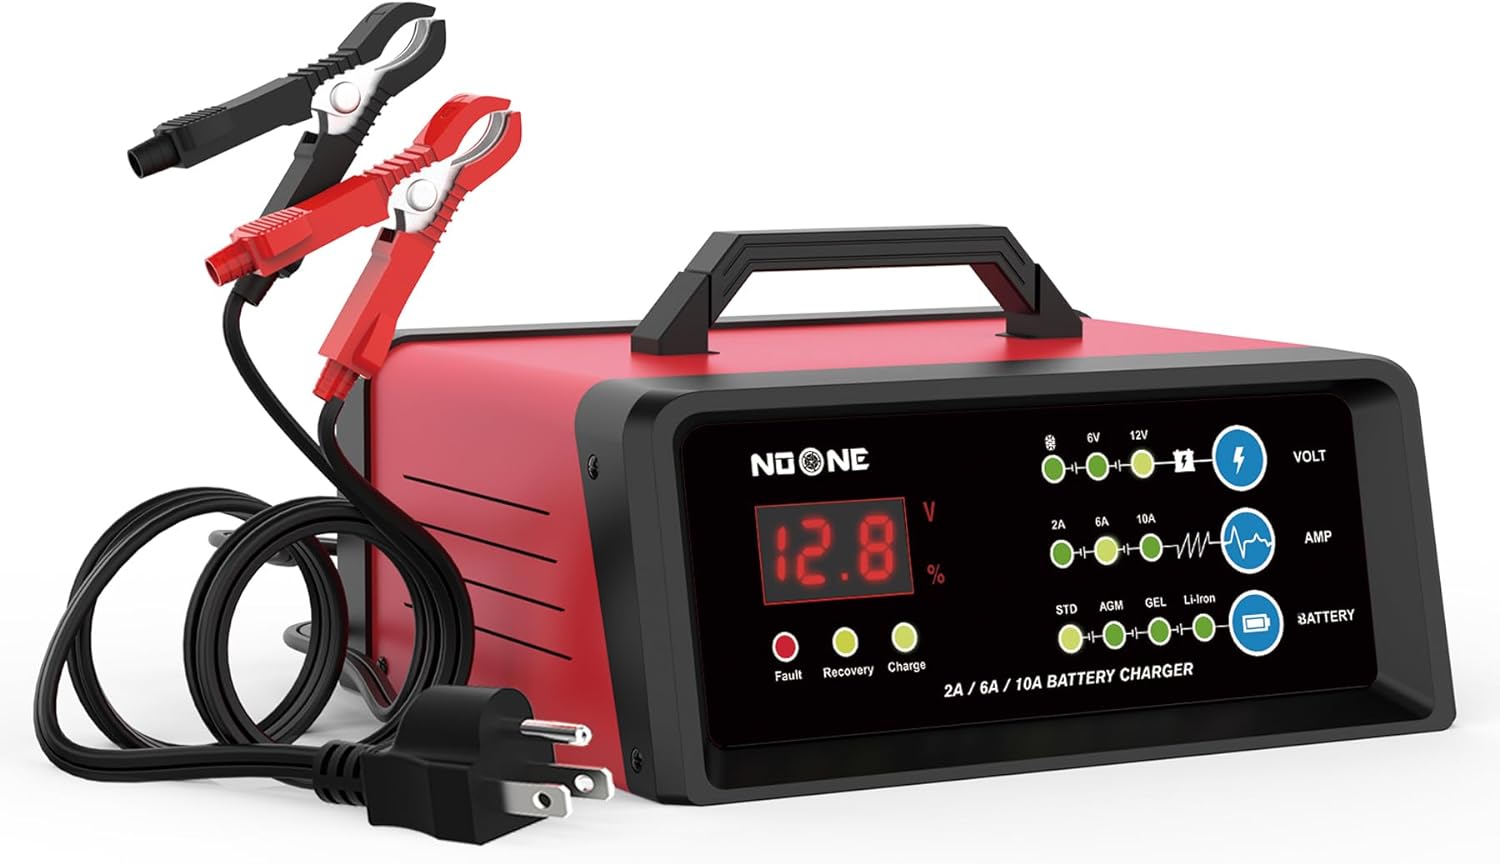 NOONE Car Battery Charger Review